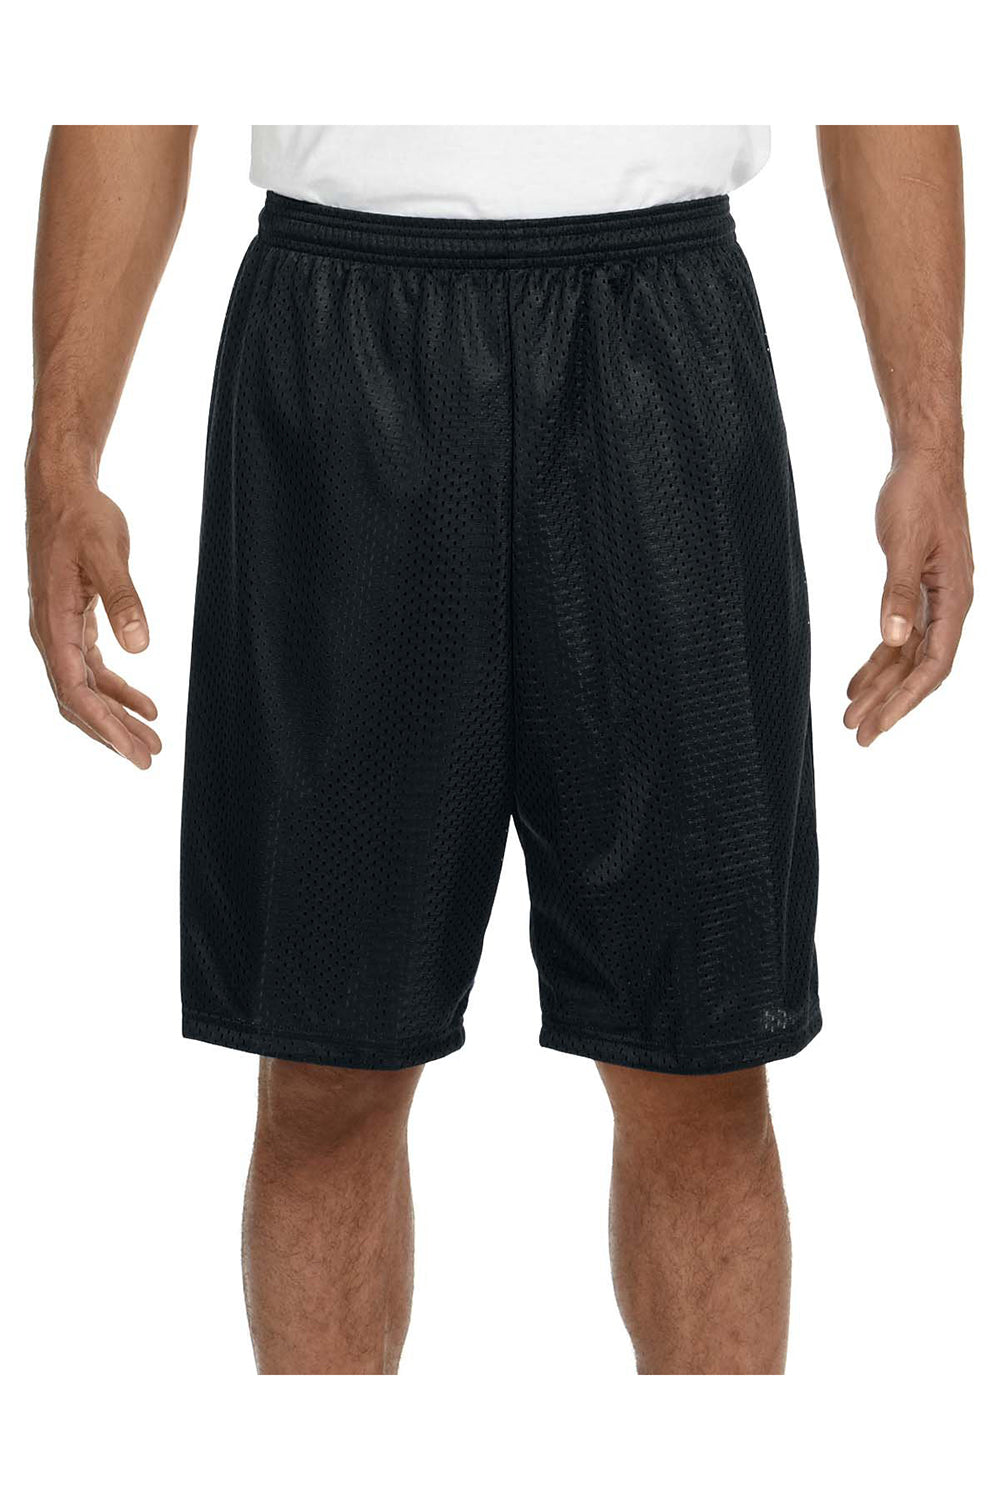 A4 N5296 Mens Moisture Wicking Tricot Mesh Shorts Black Model Front